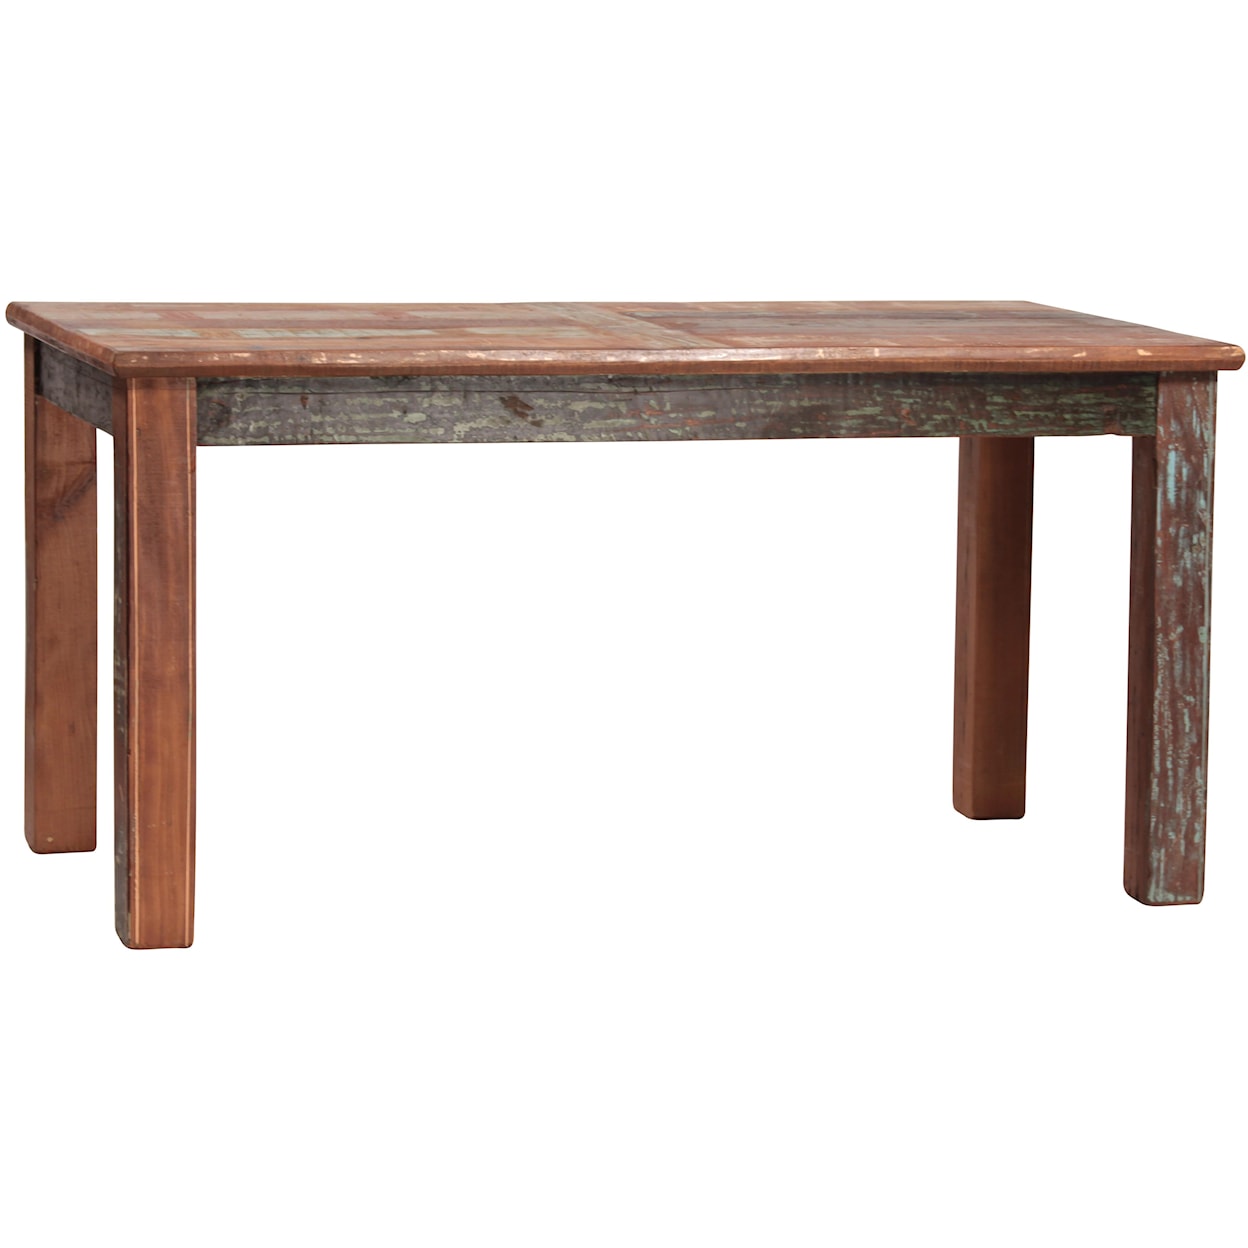 Dovetail Furniture Dovetail Dining Table